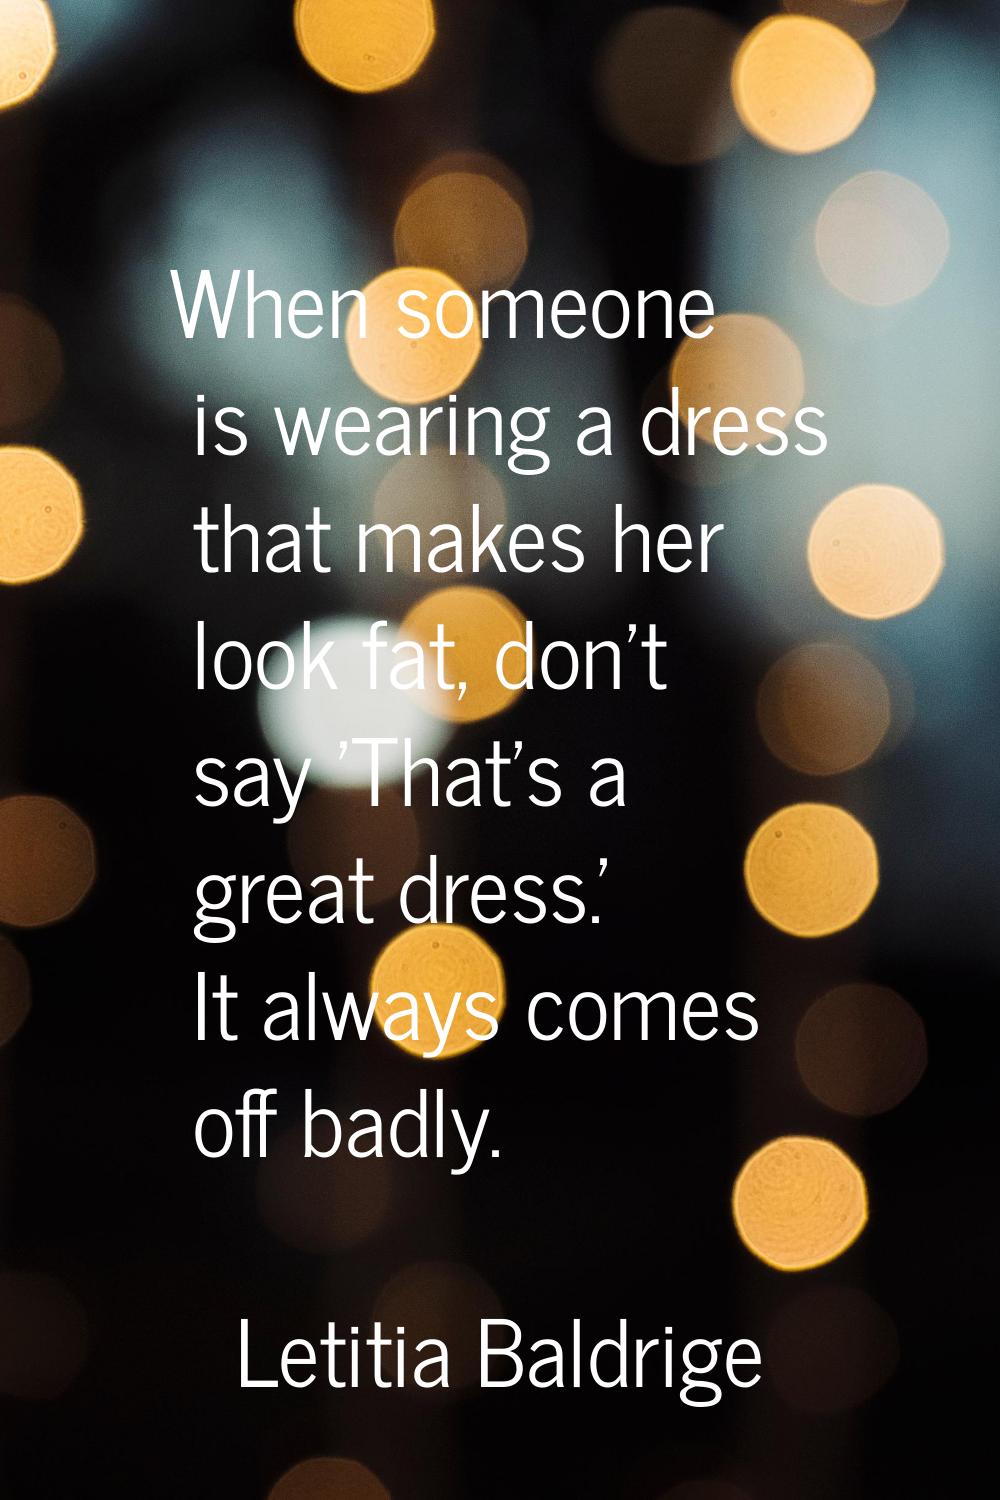 When someone is wearing a dress that makes her look fat, don't say 'That's a great dress.' It alway